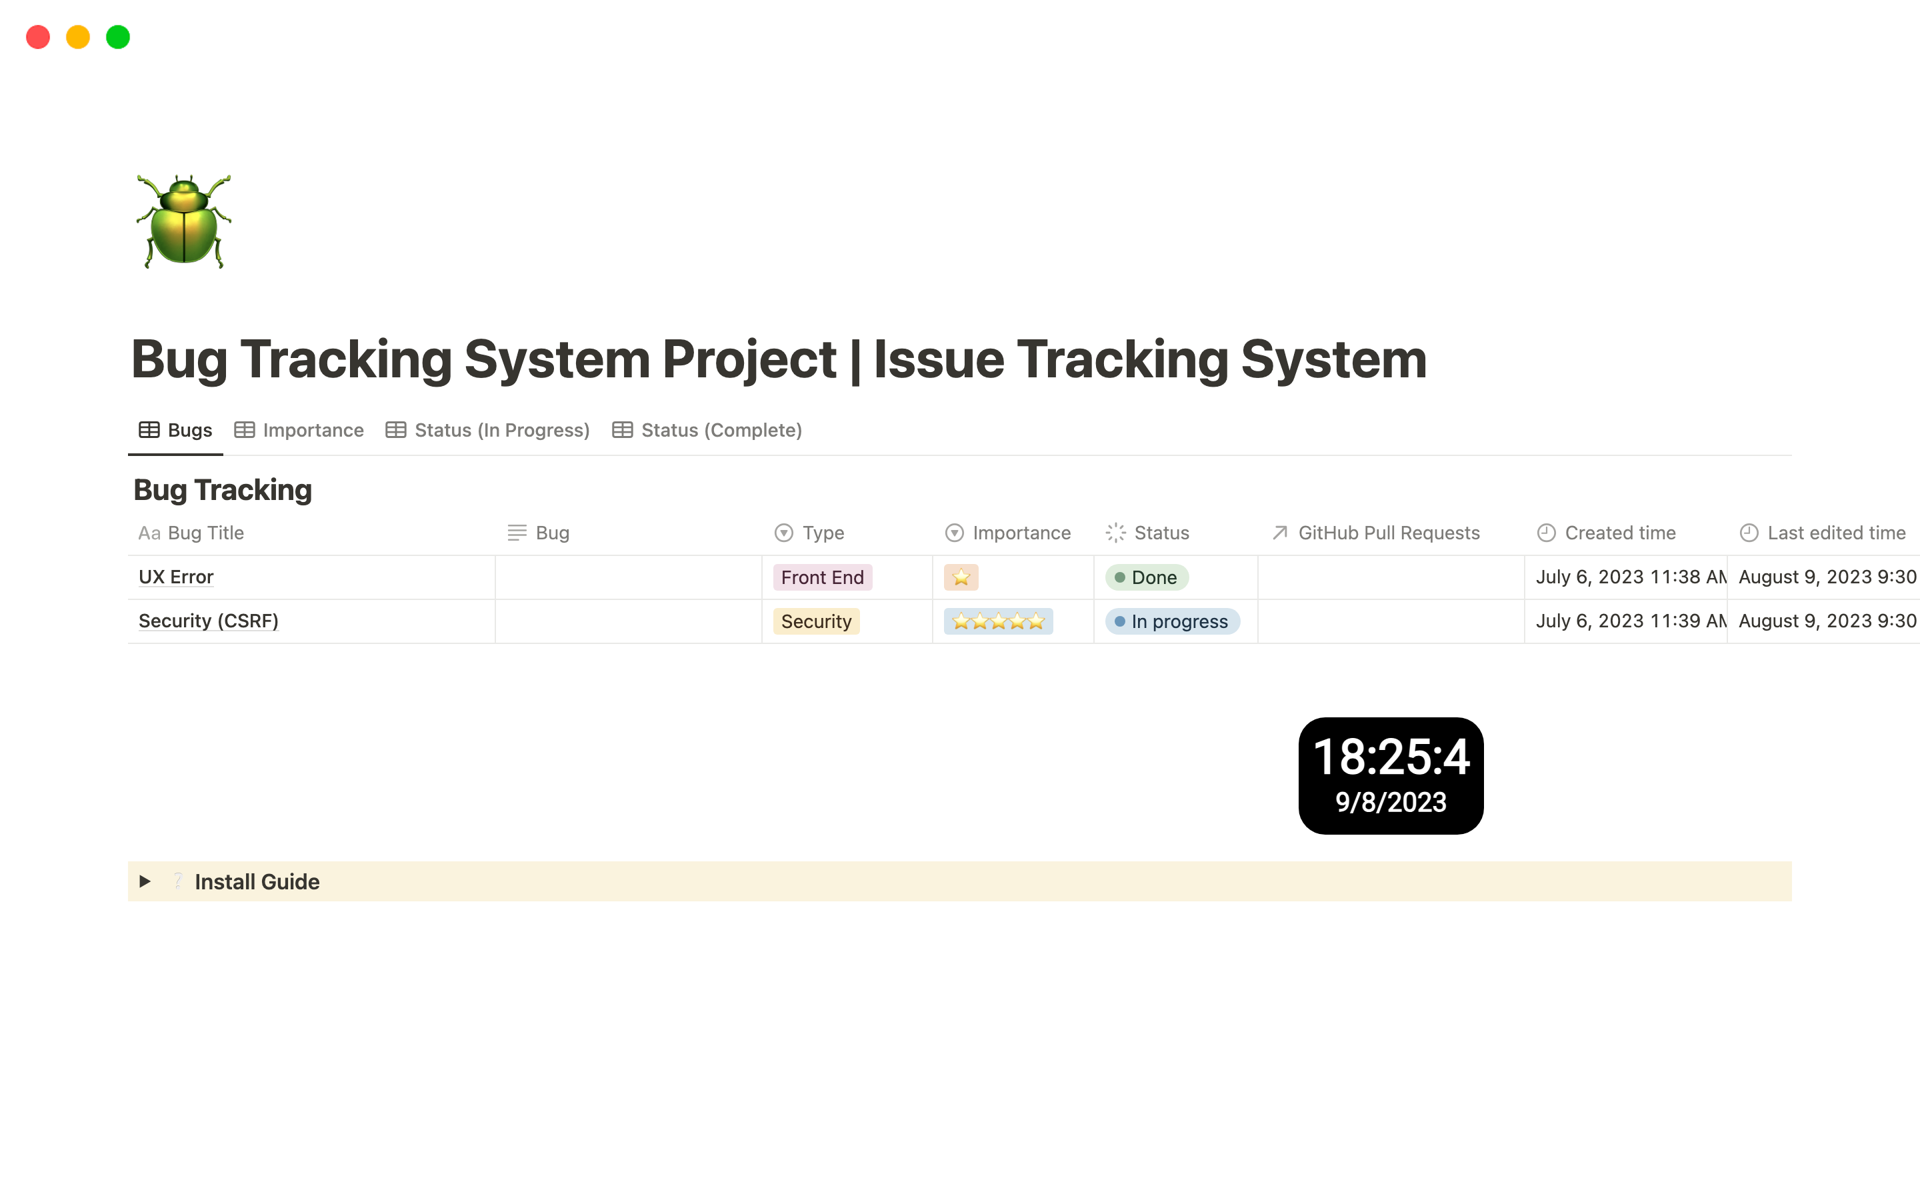 Our comprehensive Bug Tracking System Project encompasses an efficient Issue Tracking System designed to streamline bug tracking software development processes.